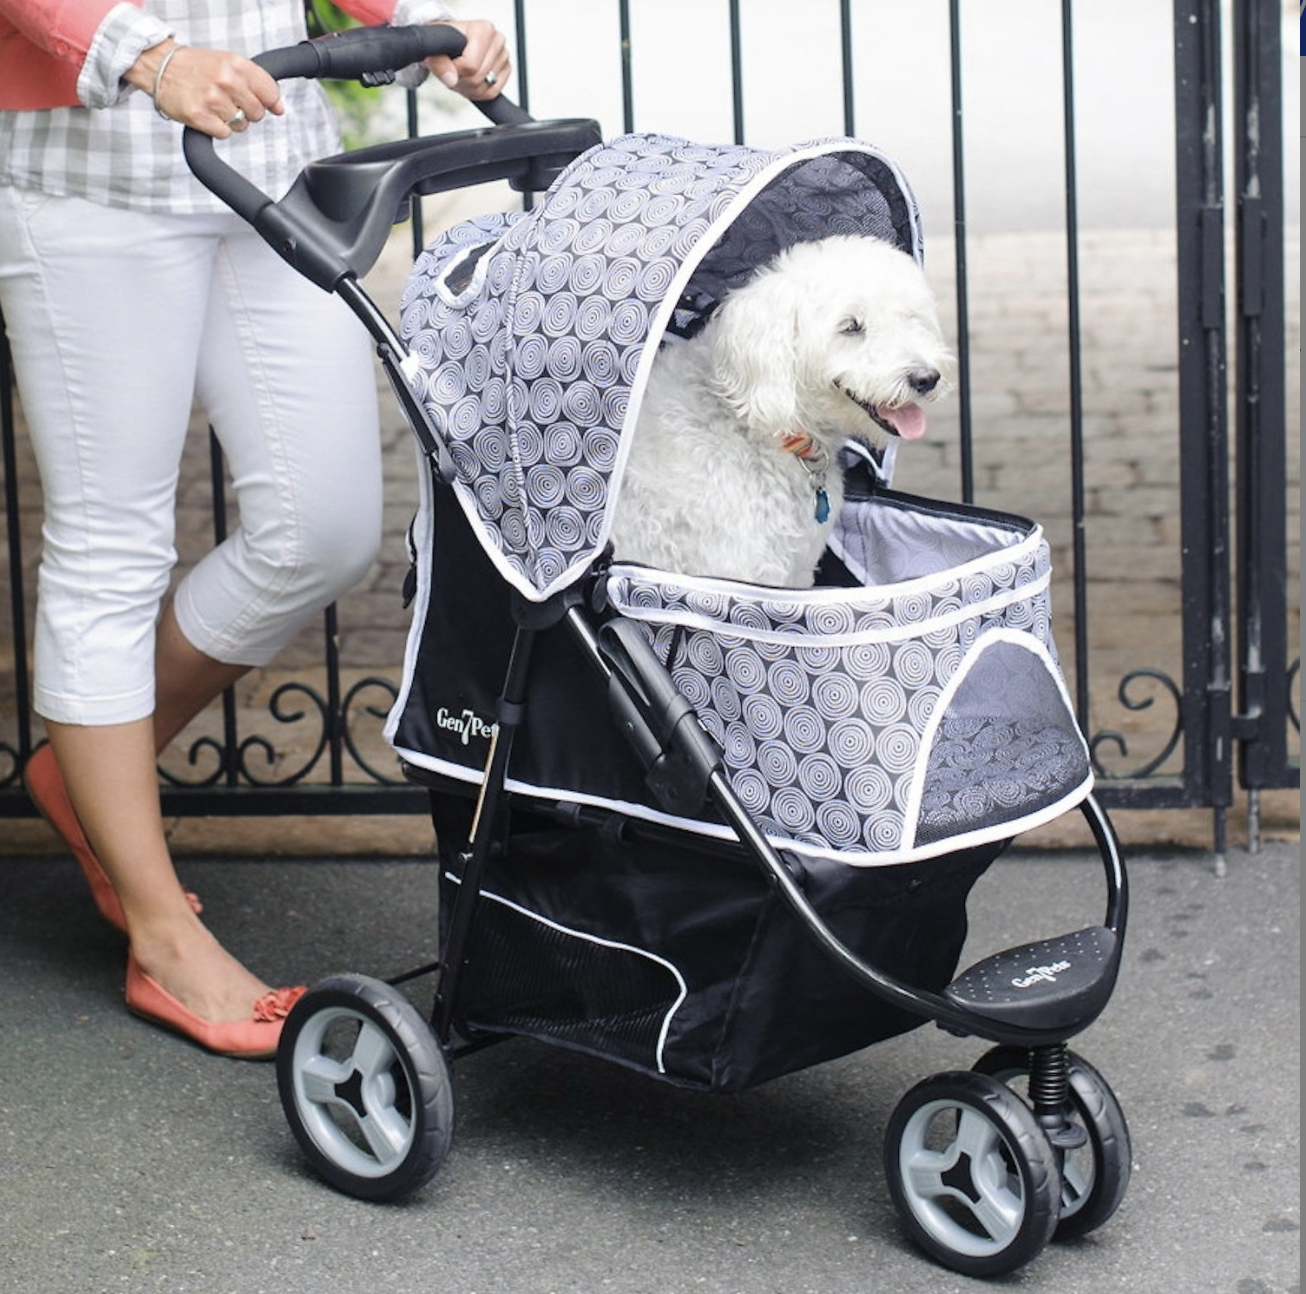 6 Luxury Dog Strollers for Stylish Pooches - Hey, Djangles.